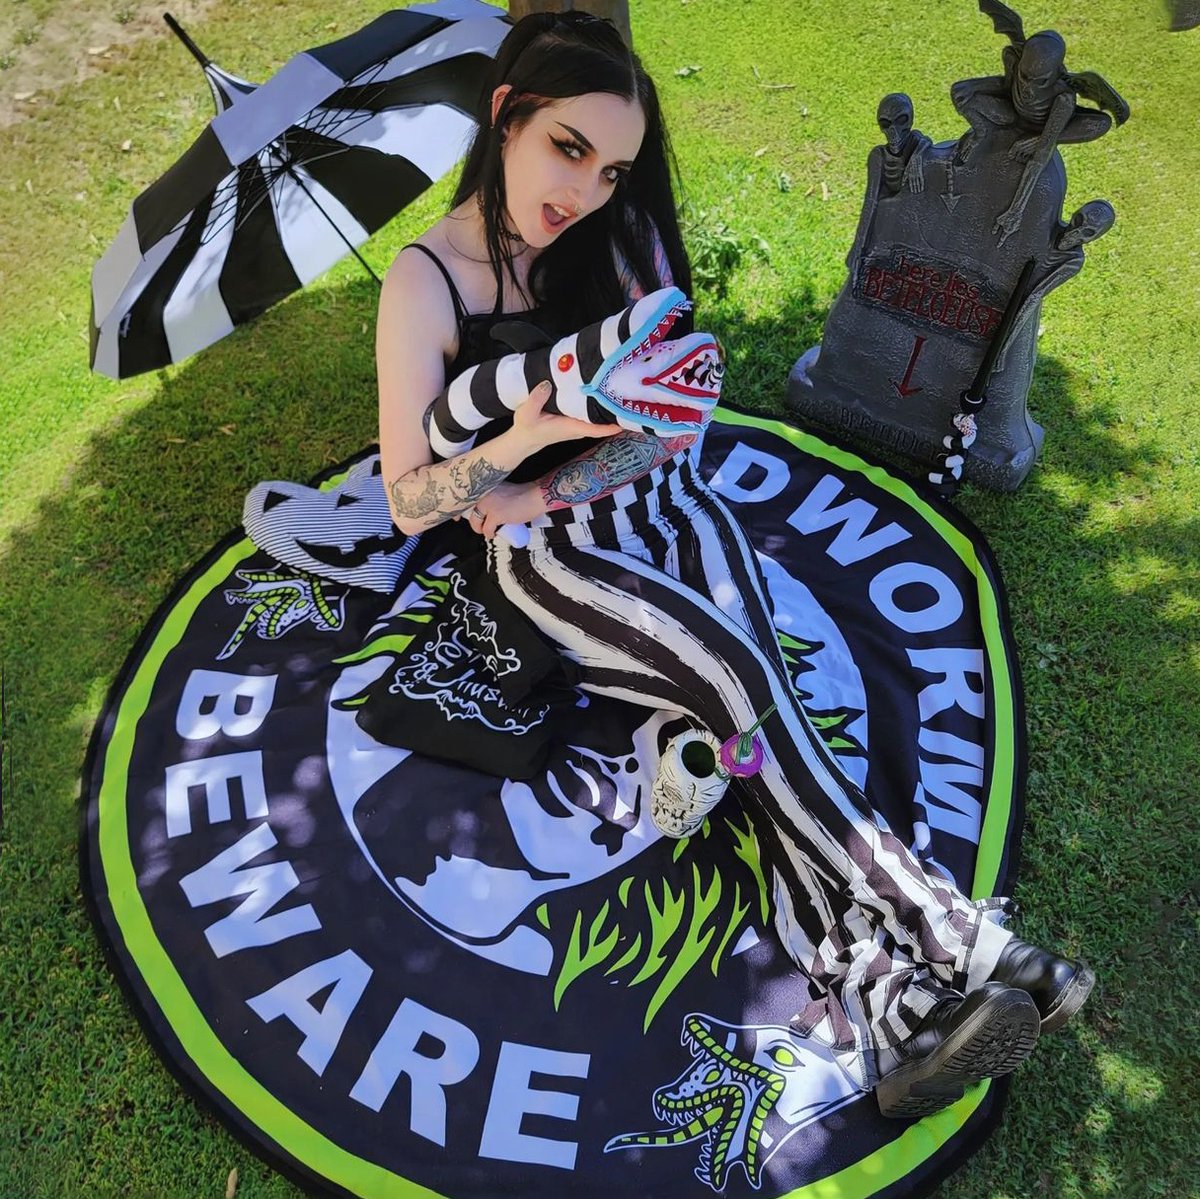 Our 50% off beach towels ends in 12 HOURS! Take advantage of these deals today! 🖤☀️

#TooFastClothing #SummerGoth #SummerSales #AlternativeSummer